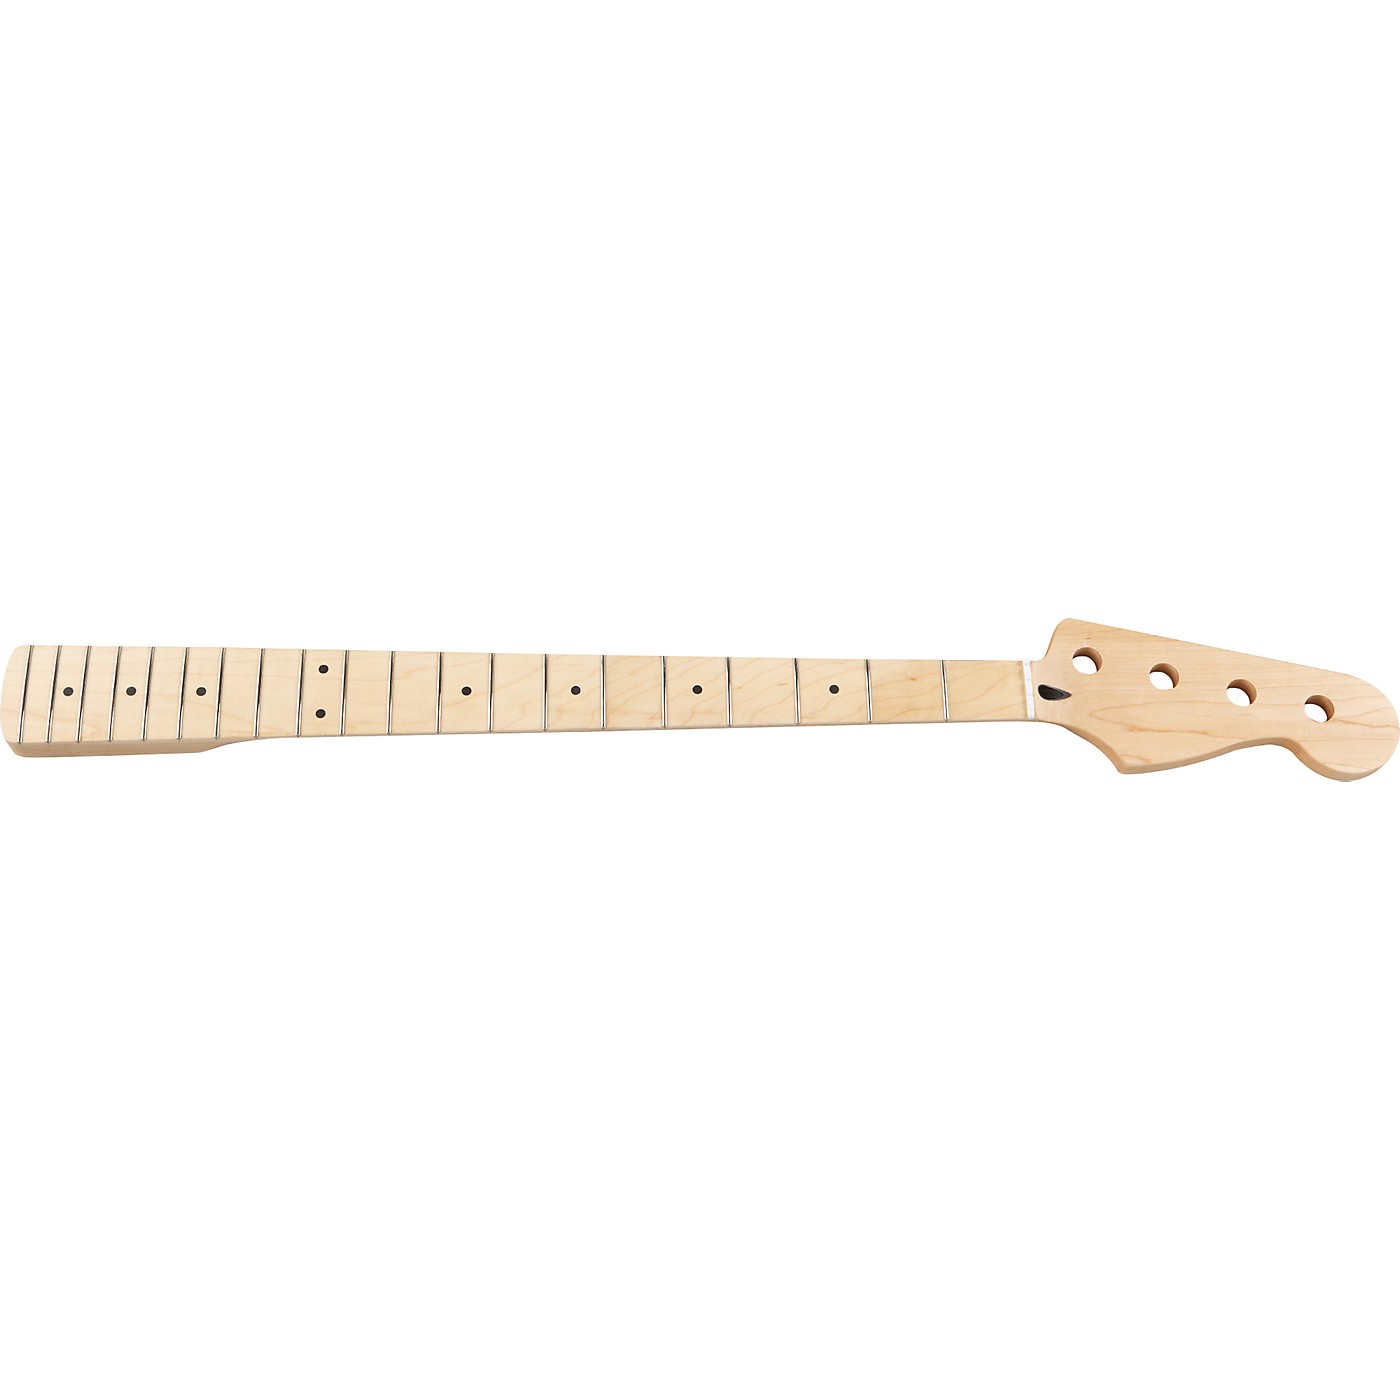 Mighty Mite MM2909 Jazz Bass Replacement Neck with Maple Fingerboard thumbnail